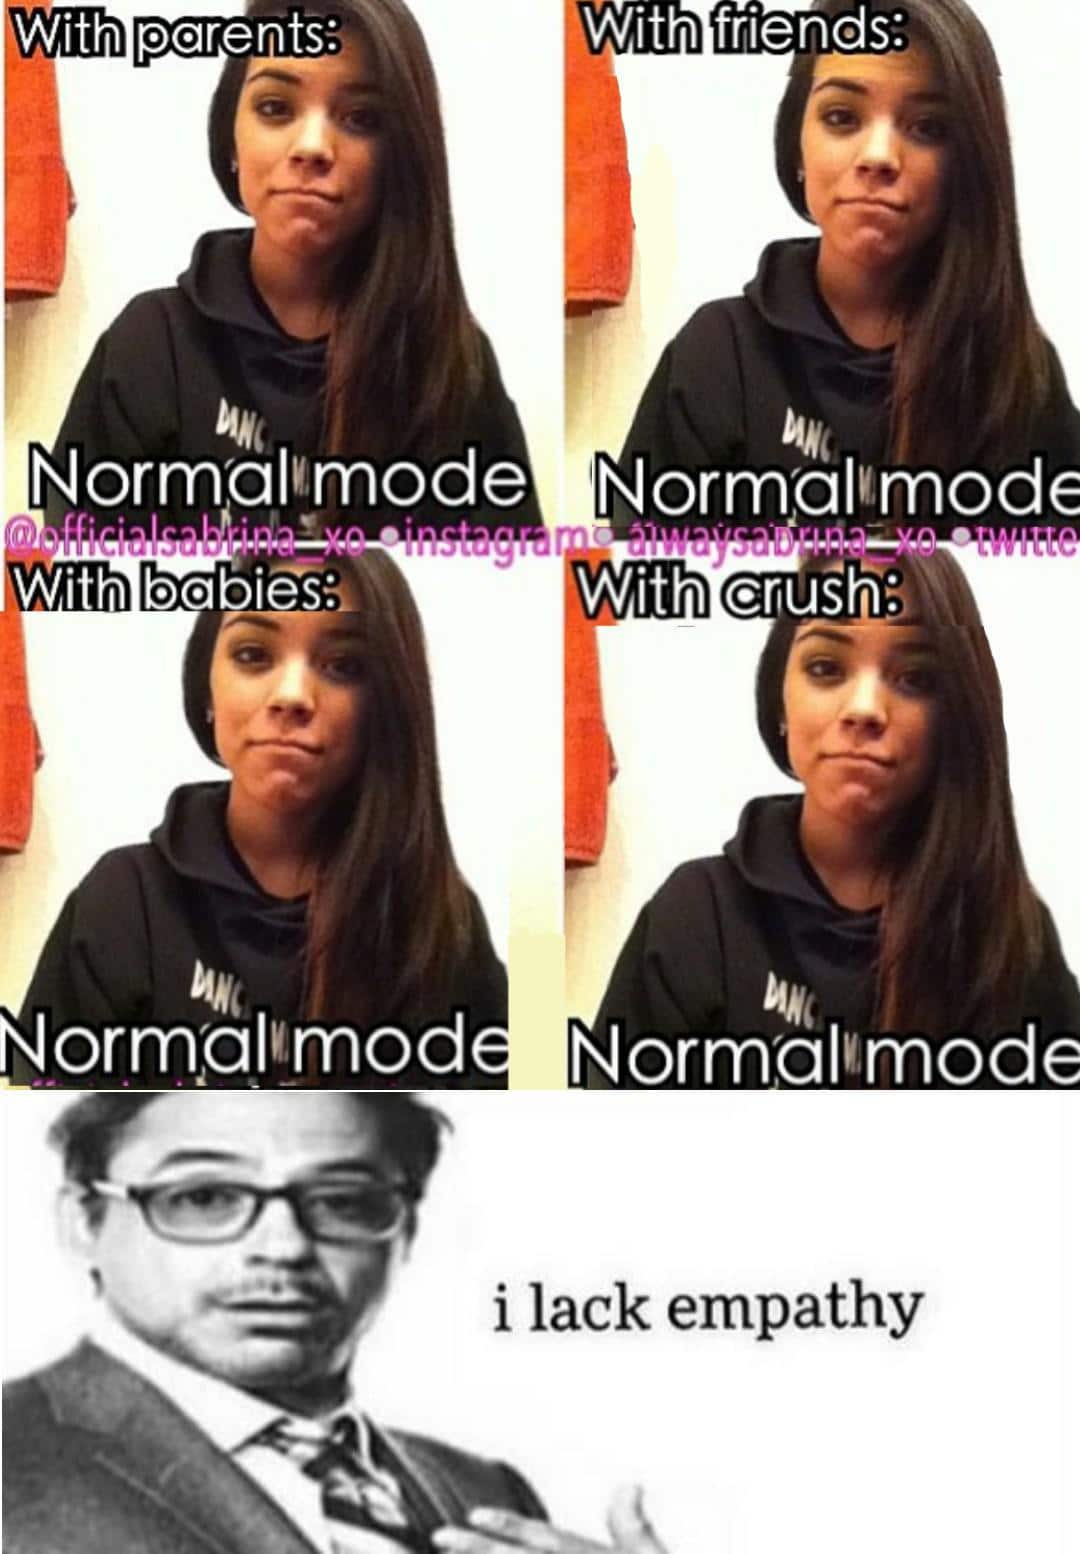 Cringe, The Prince, Stop, Scary Movie, Satire, PanelCringe cringe memes Cringe, The Prince, Stop, Scary Movie, Satire, PanelCringe text: With parents: \With fiiéhds: Normal[mode Normalvmode With Normal!rnod With crush: Normal[mode i lack empathy 